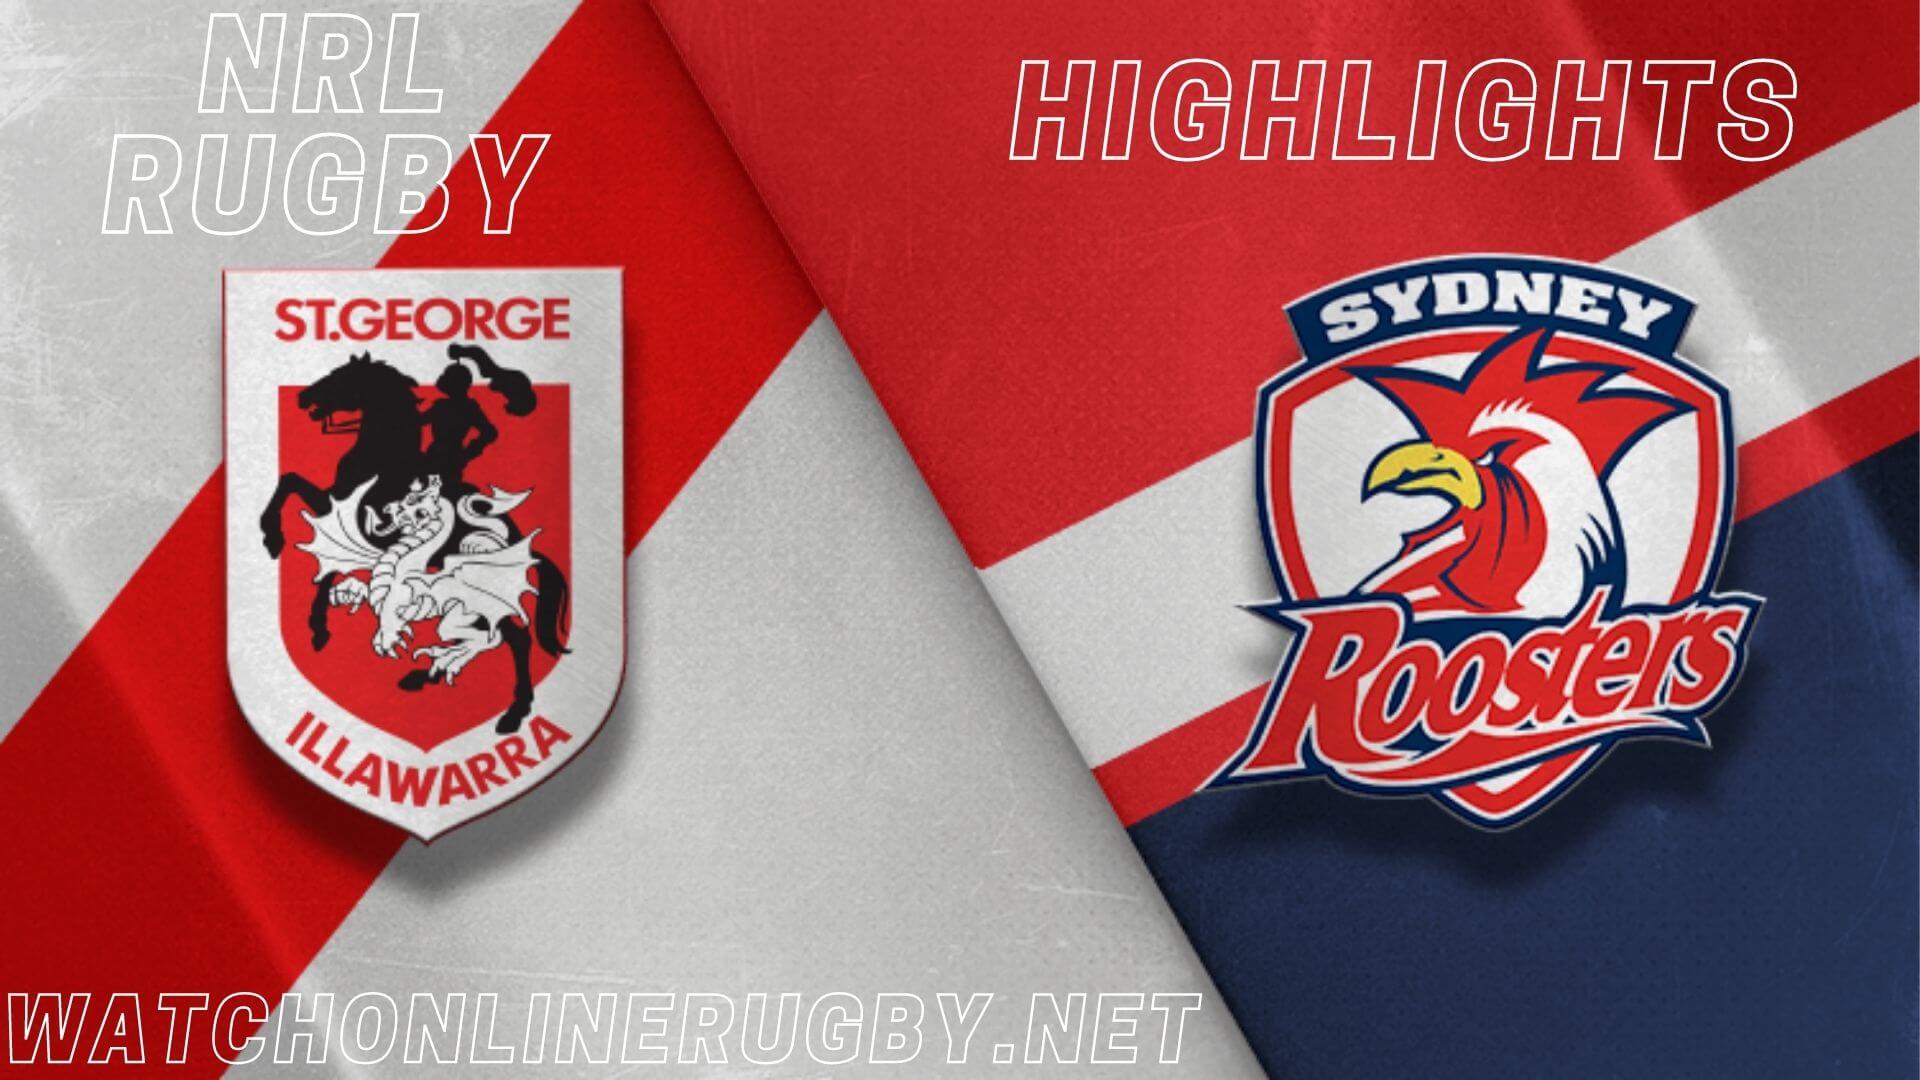 Dragons Vs Roosters Highlights RD 7 NRL Rugby